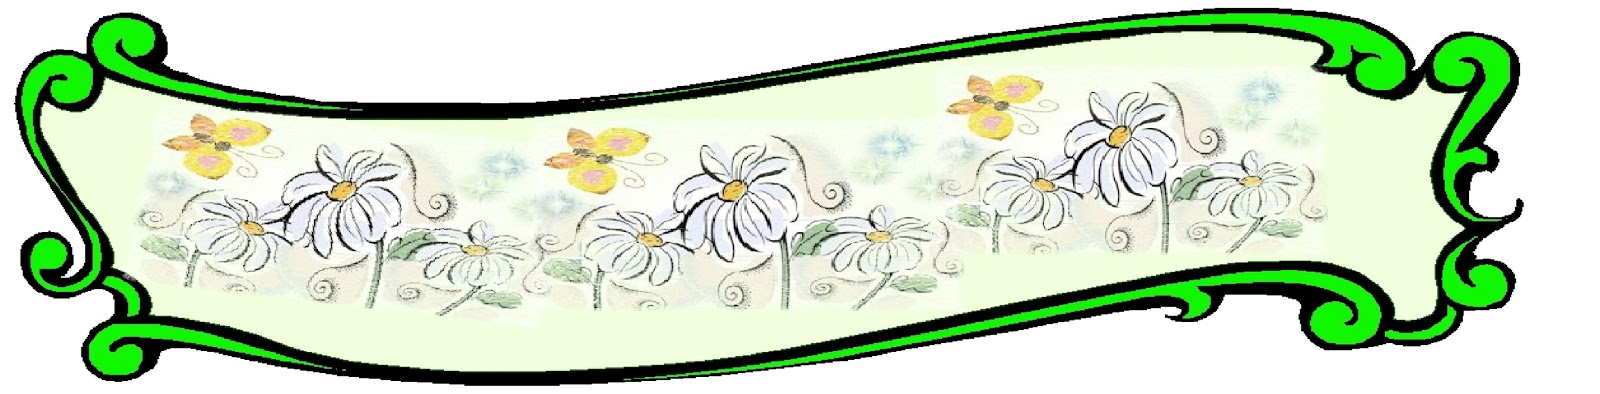 Christian Images In My Treasure Box: Daisy Banners